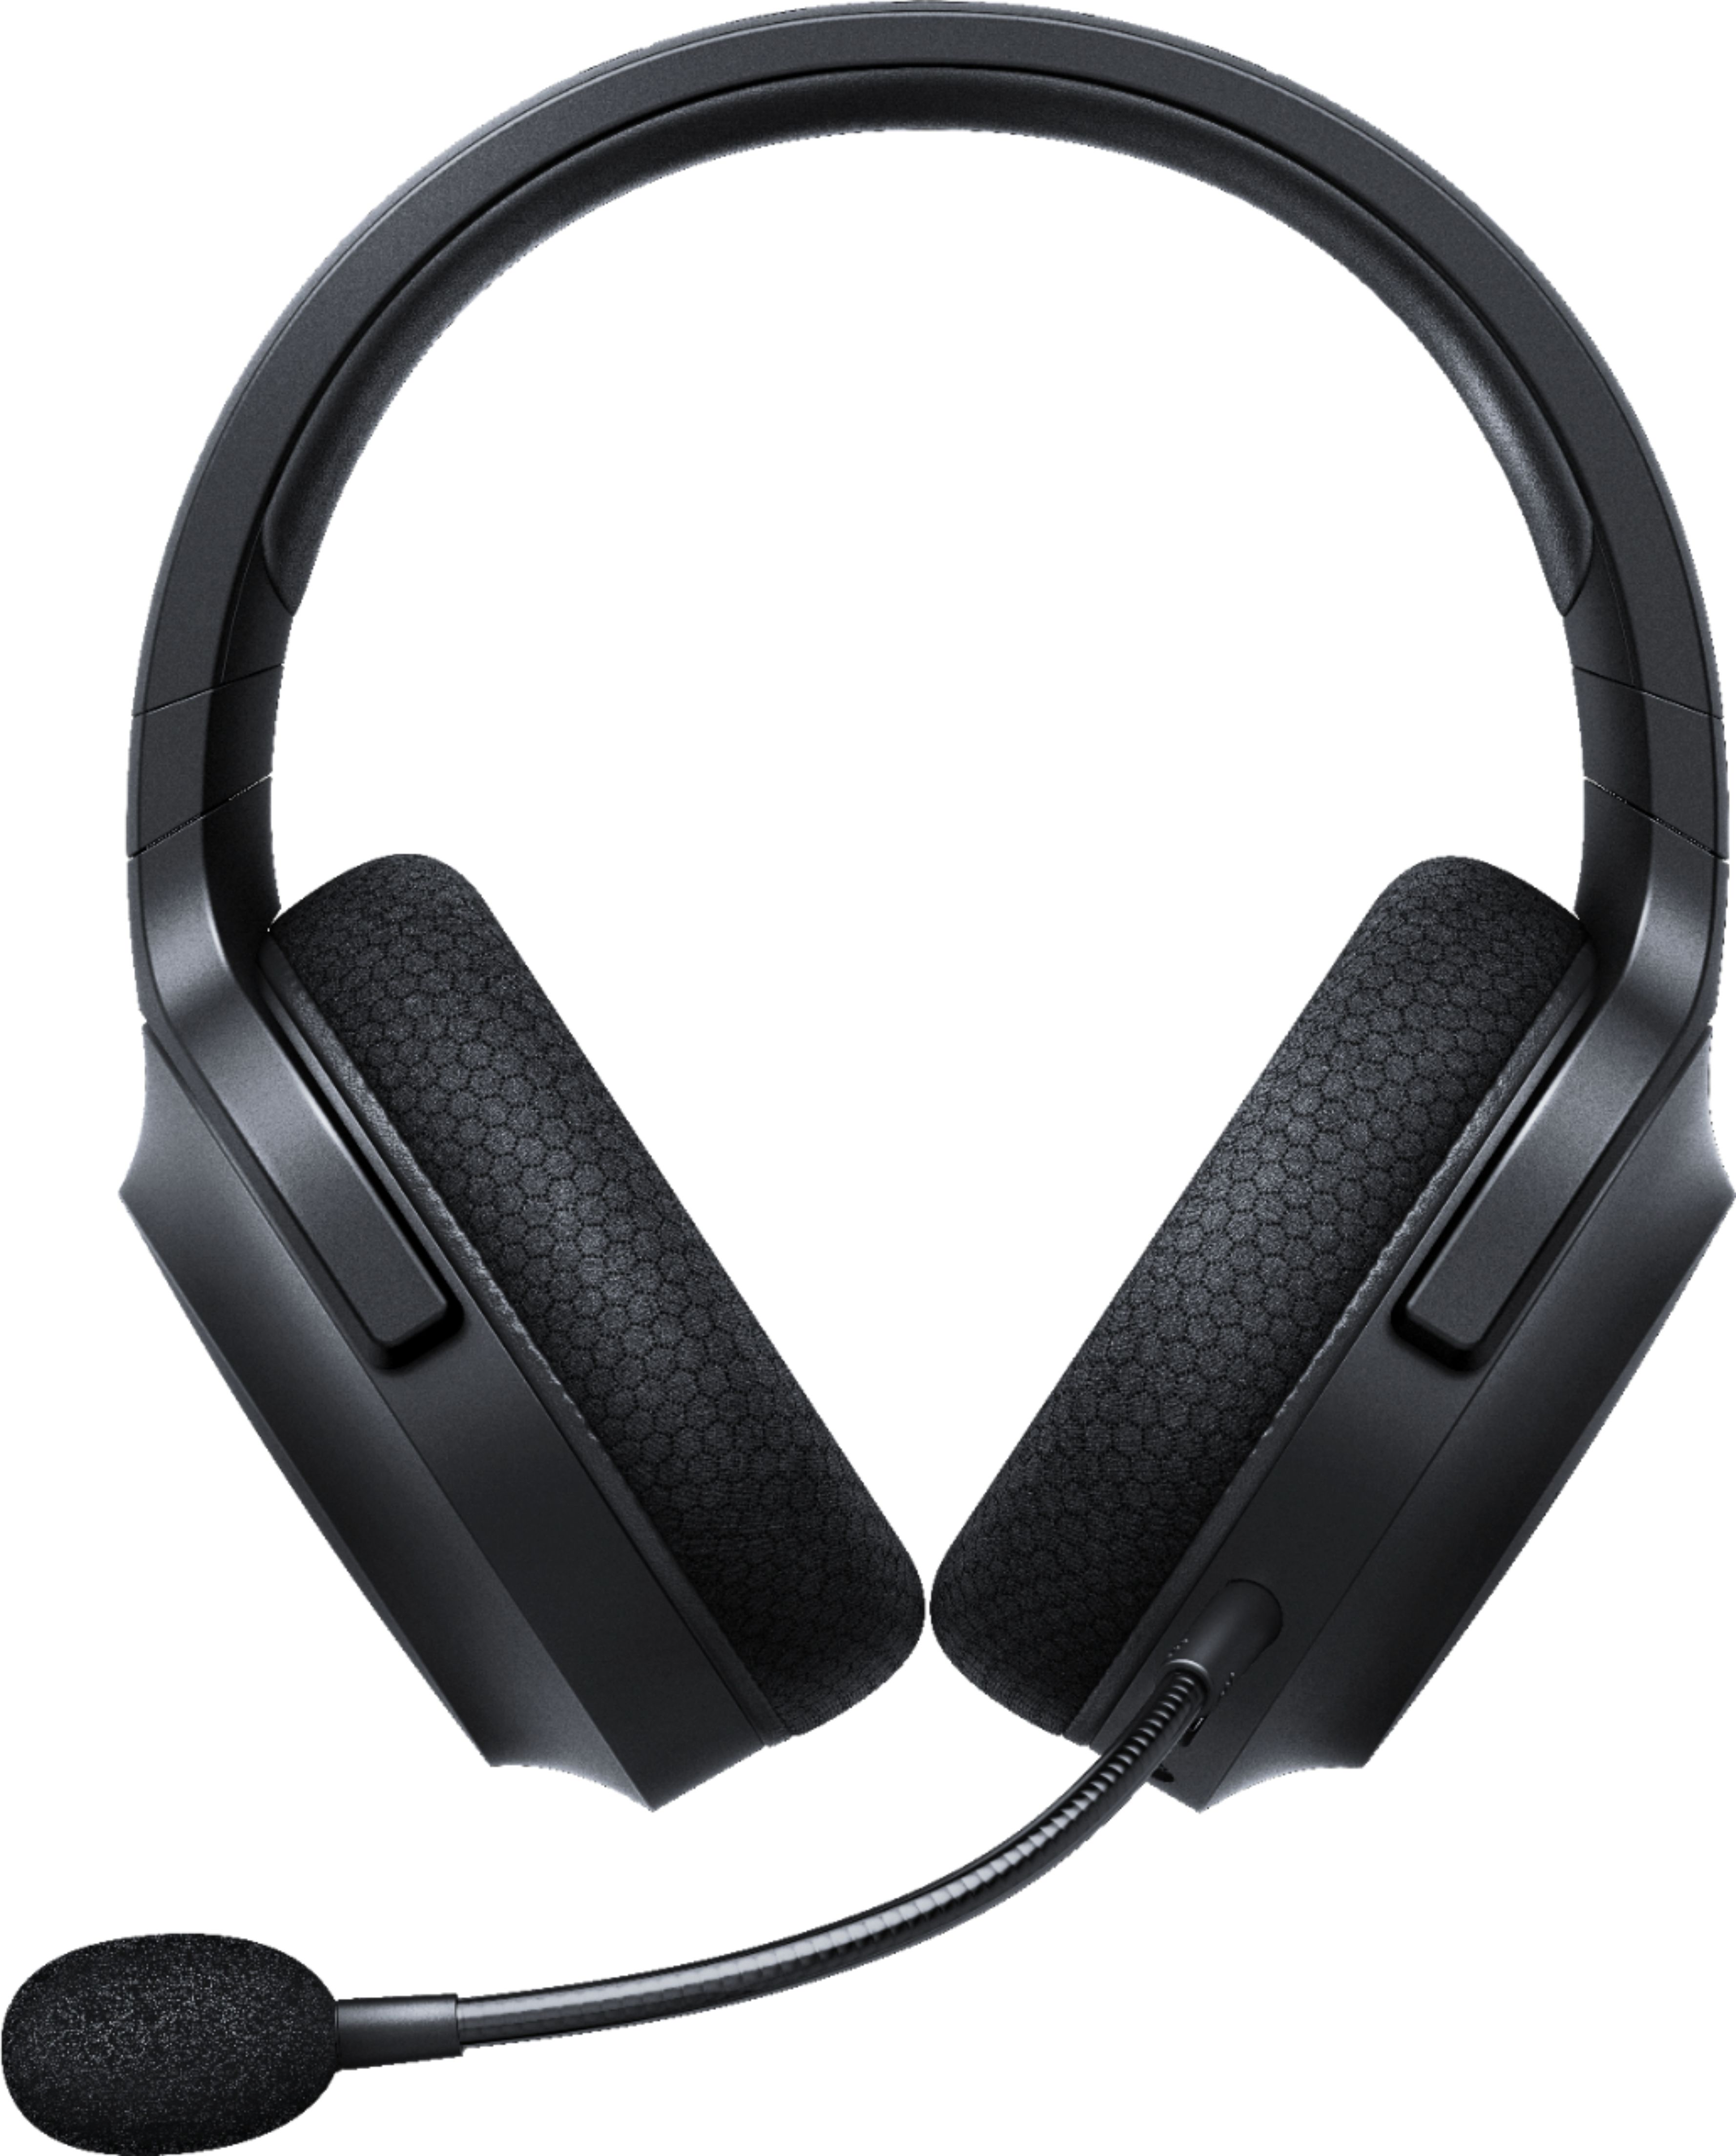 Angle View: Creative Sound BlasterX Wired Over-the-head Headset - Black